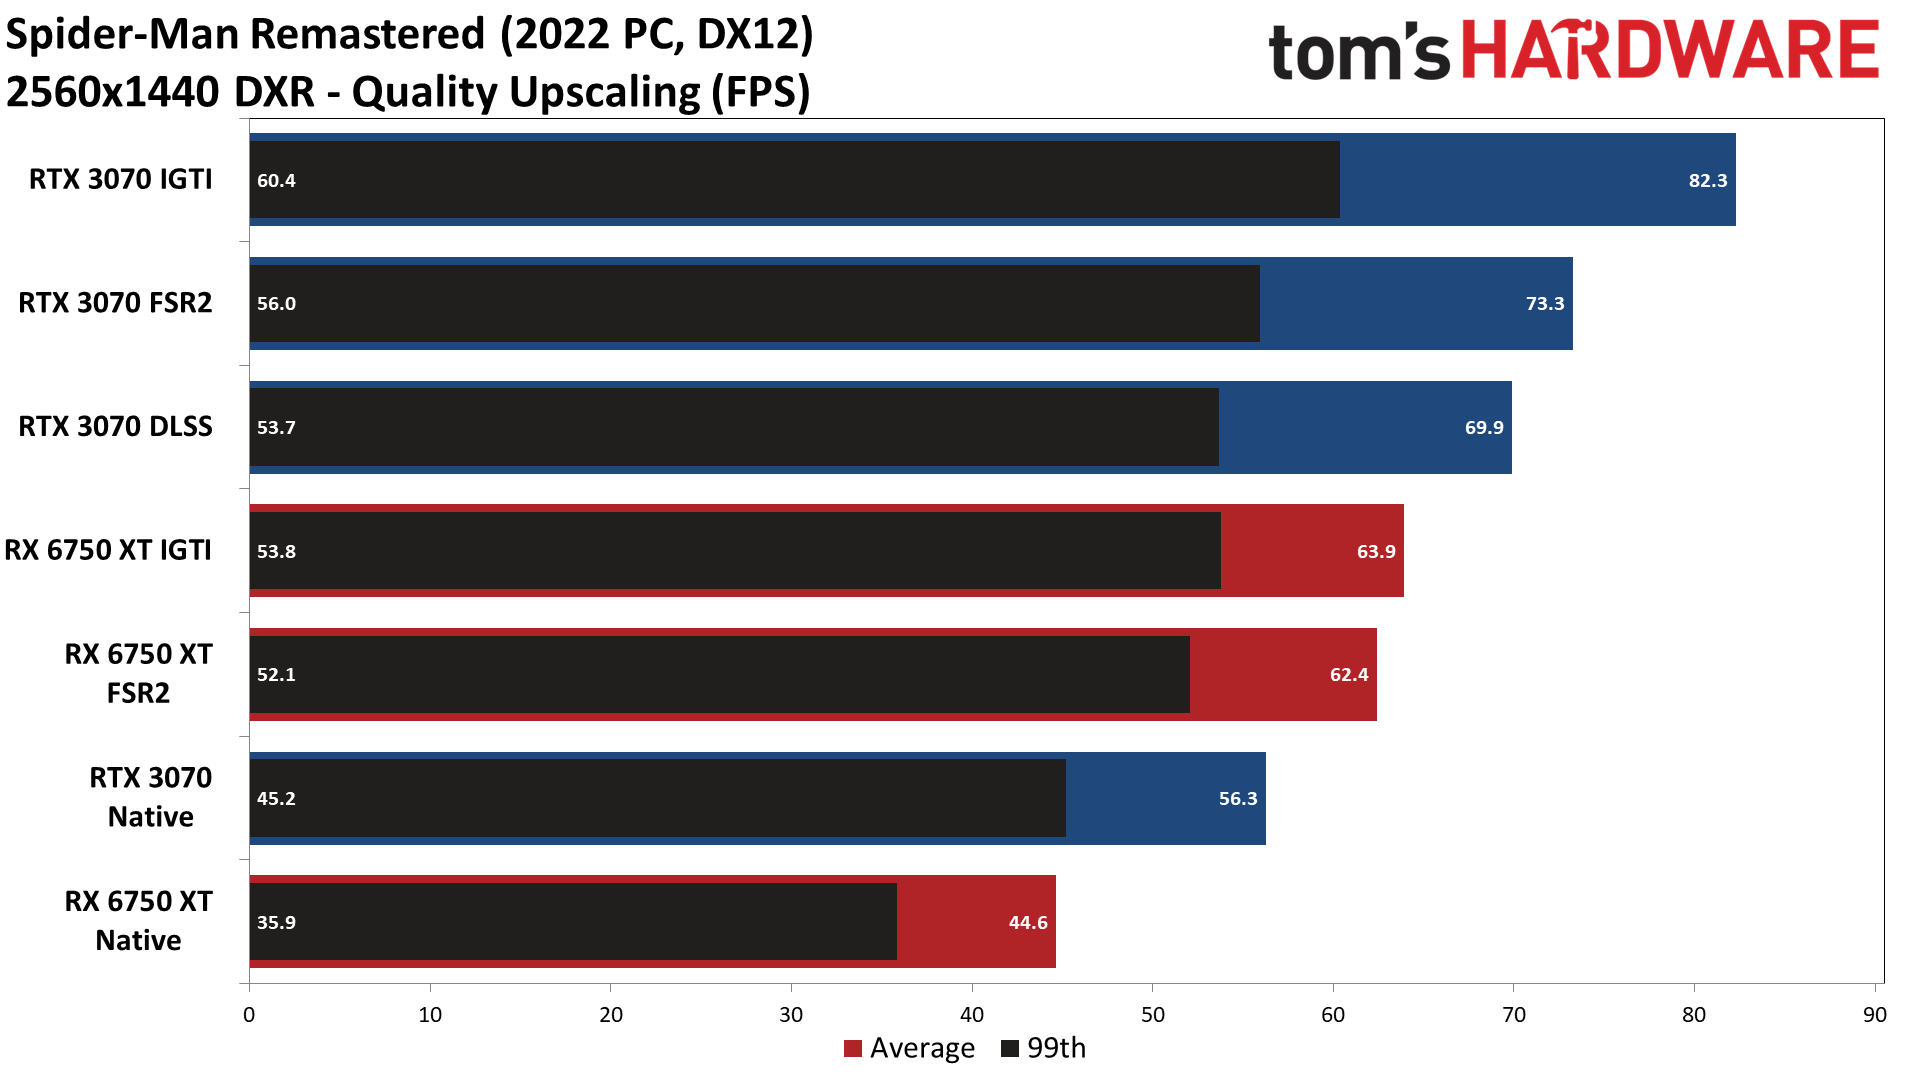 Spider-Man Remastered PC performance charts